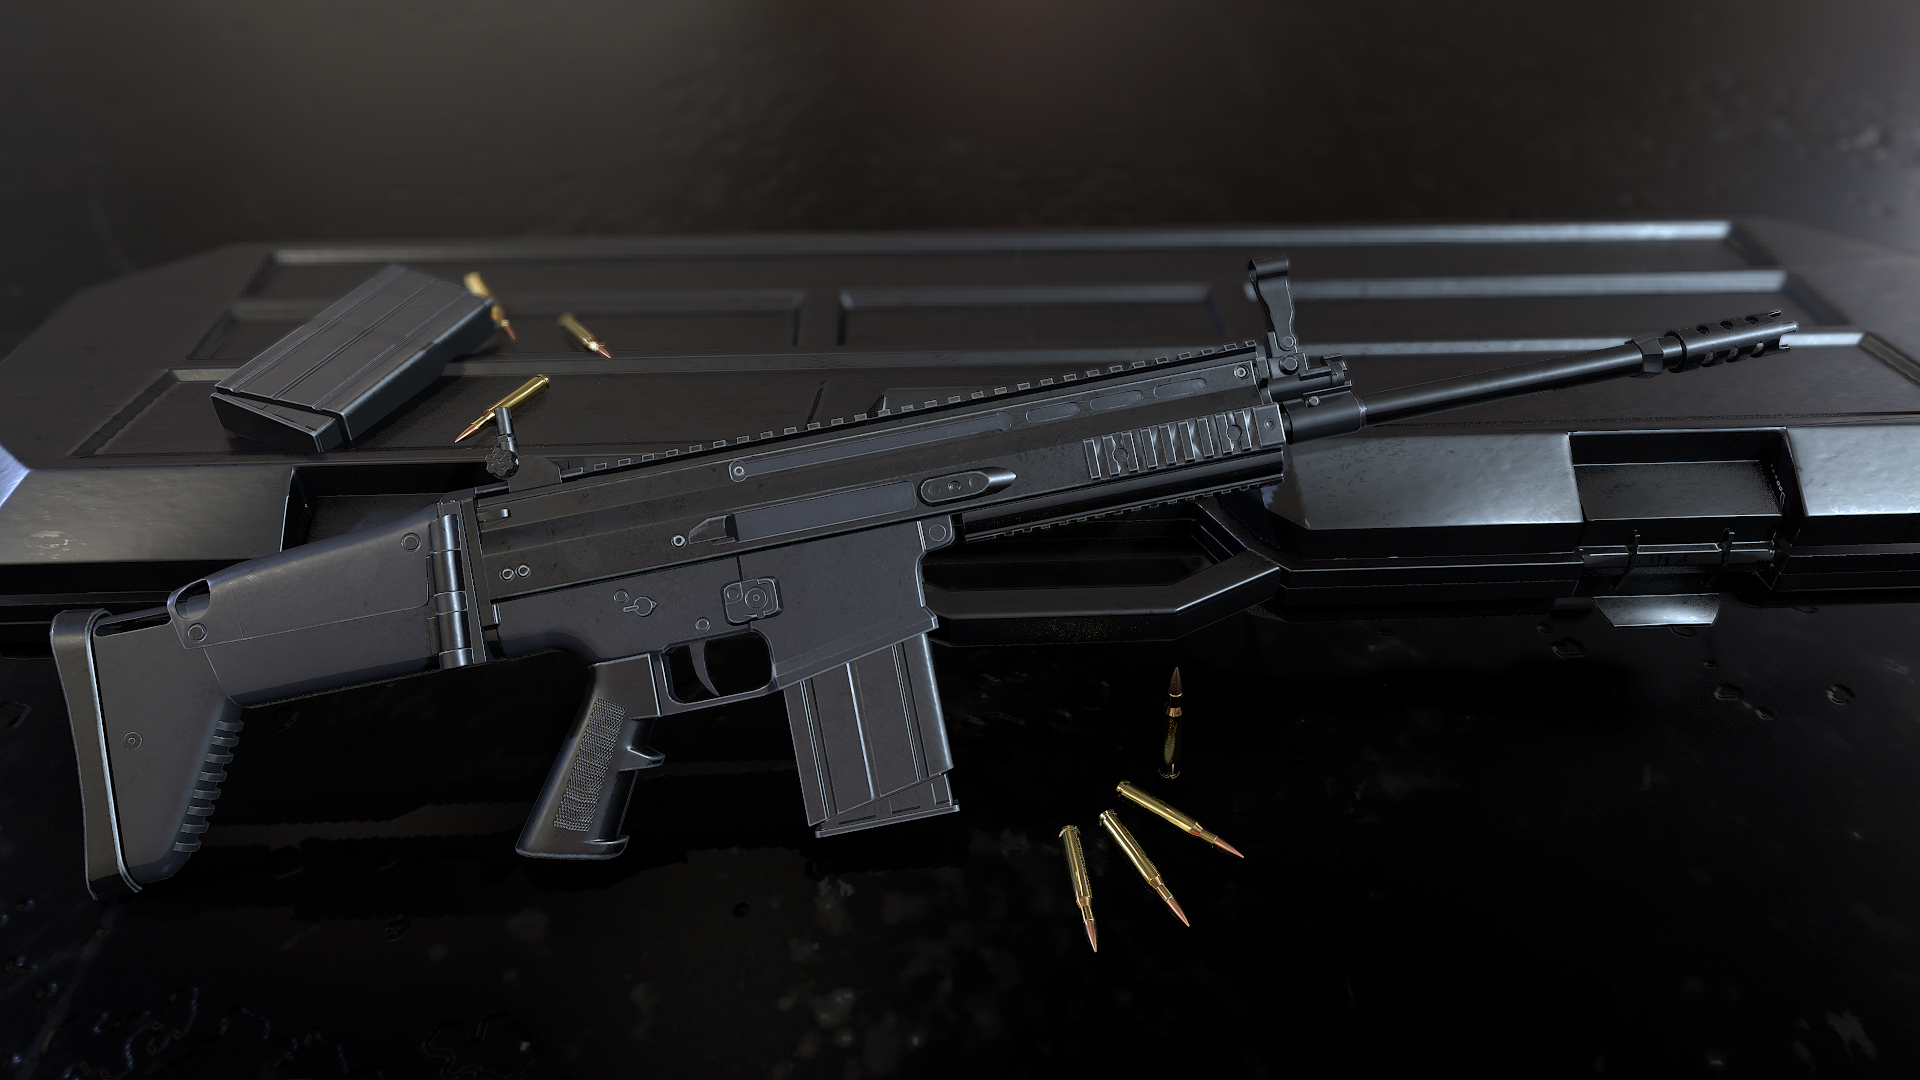 Three D weapons - FN SCAR-H